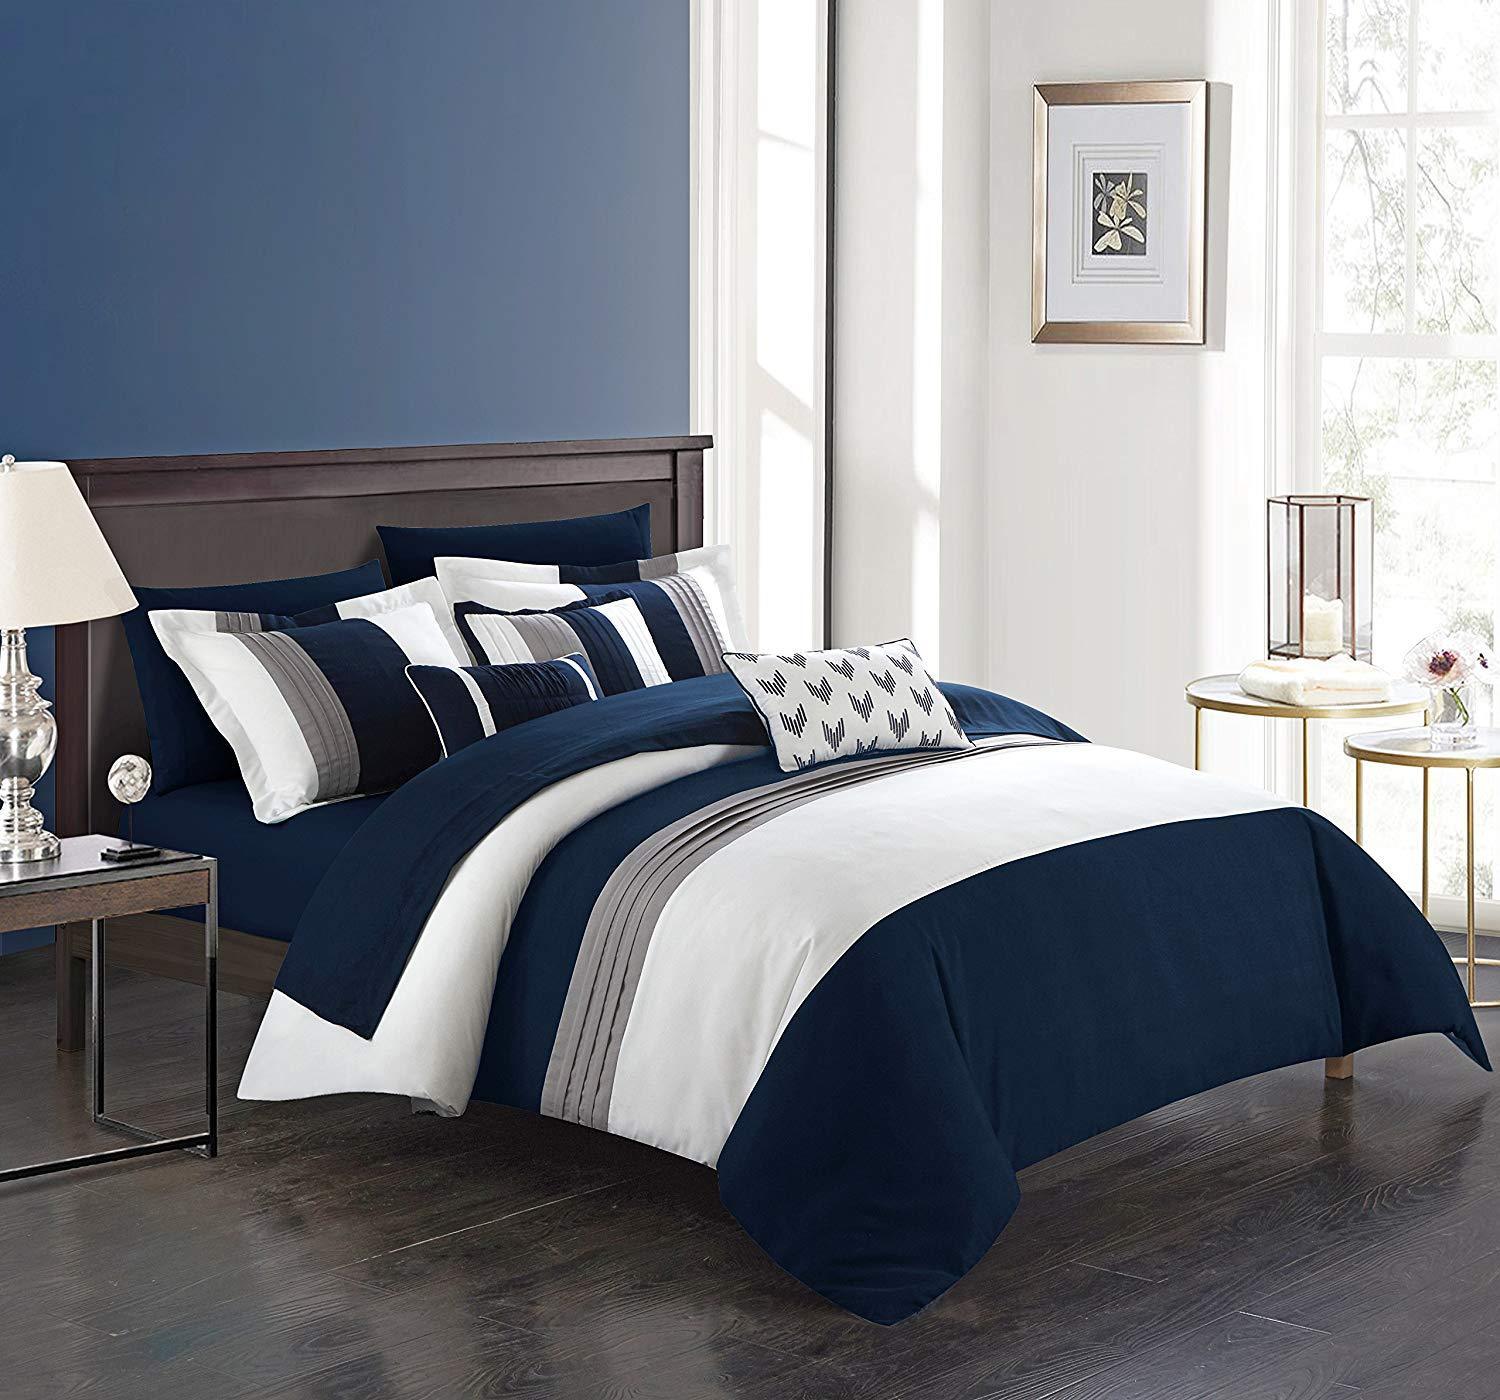 8pc Bedding Set With Duvet Covers 4 Pillow Cases Navy Hog